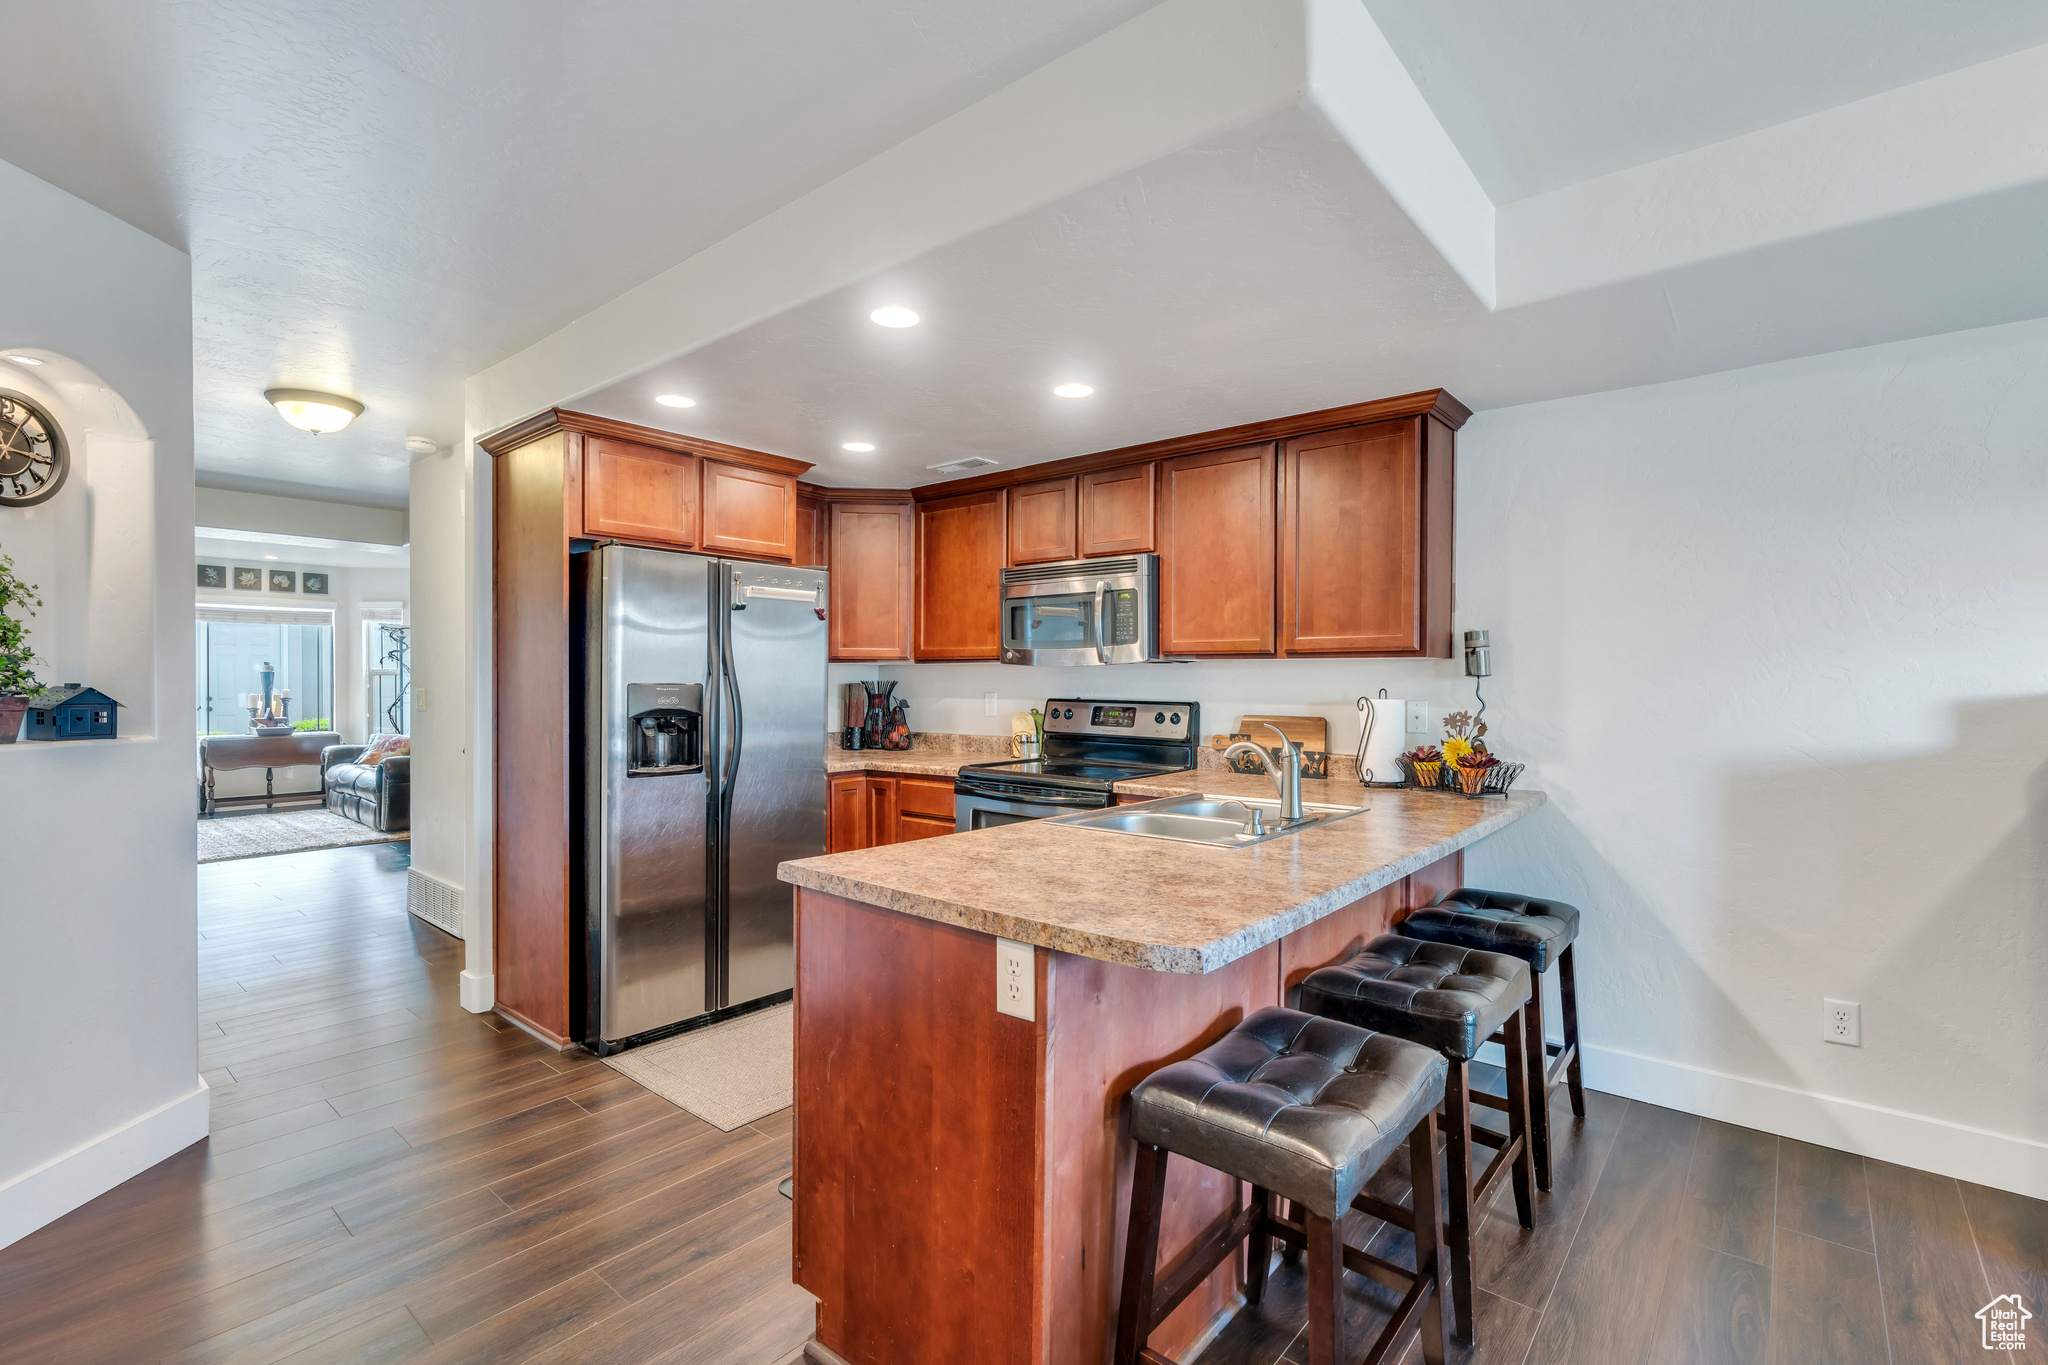 Kitchen with appliances with stainless steel finishes, dark hardwood / wood-style floors, a breakfast bar area, kitchen peninsula, and sink